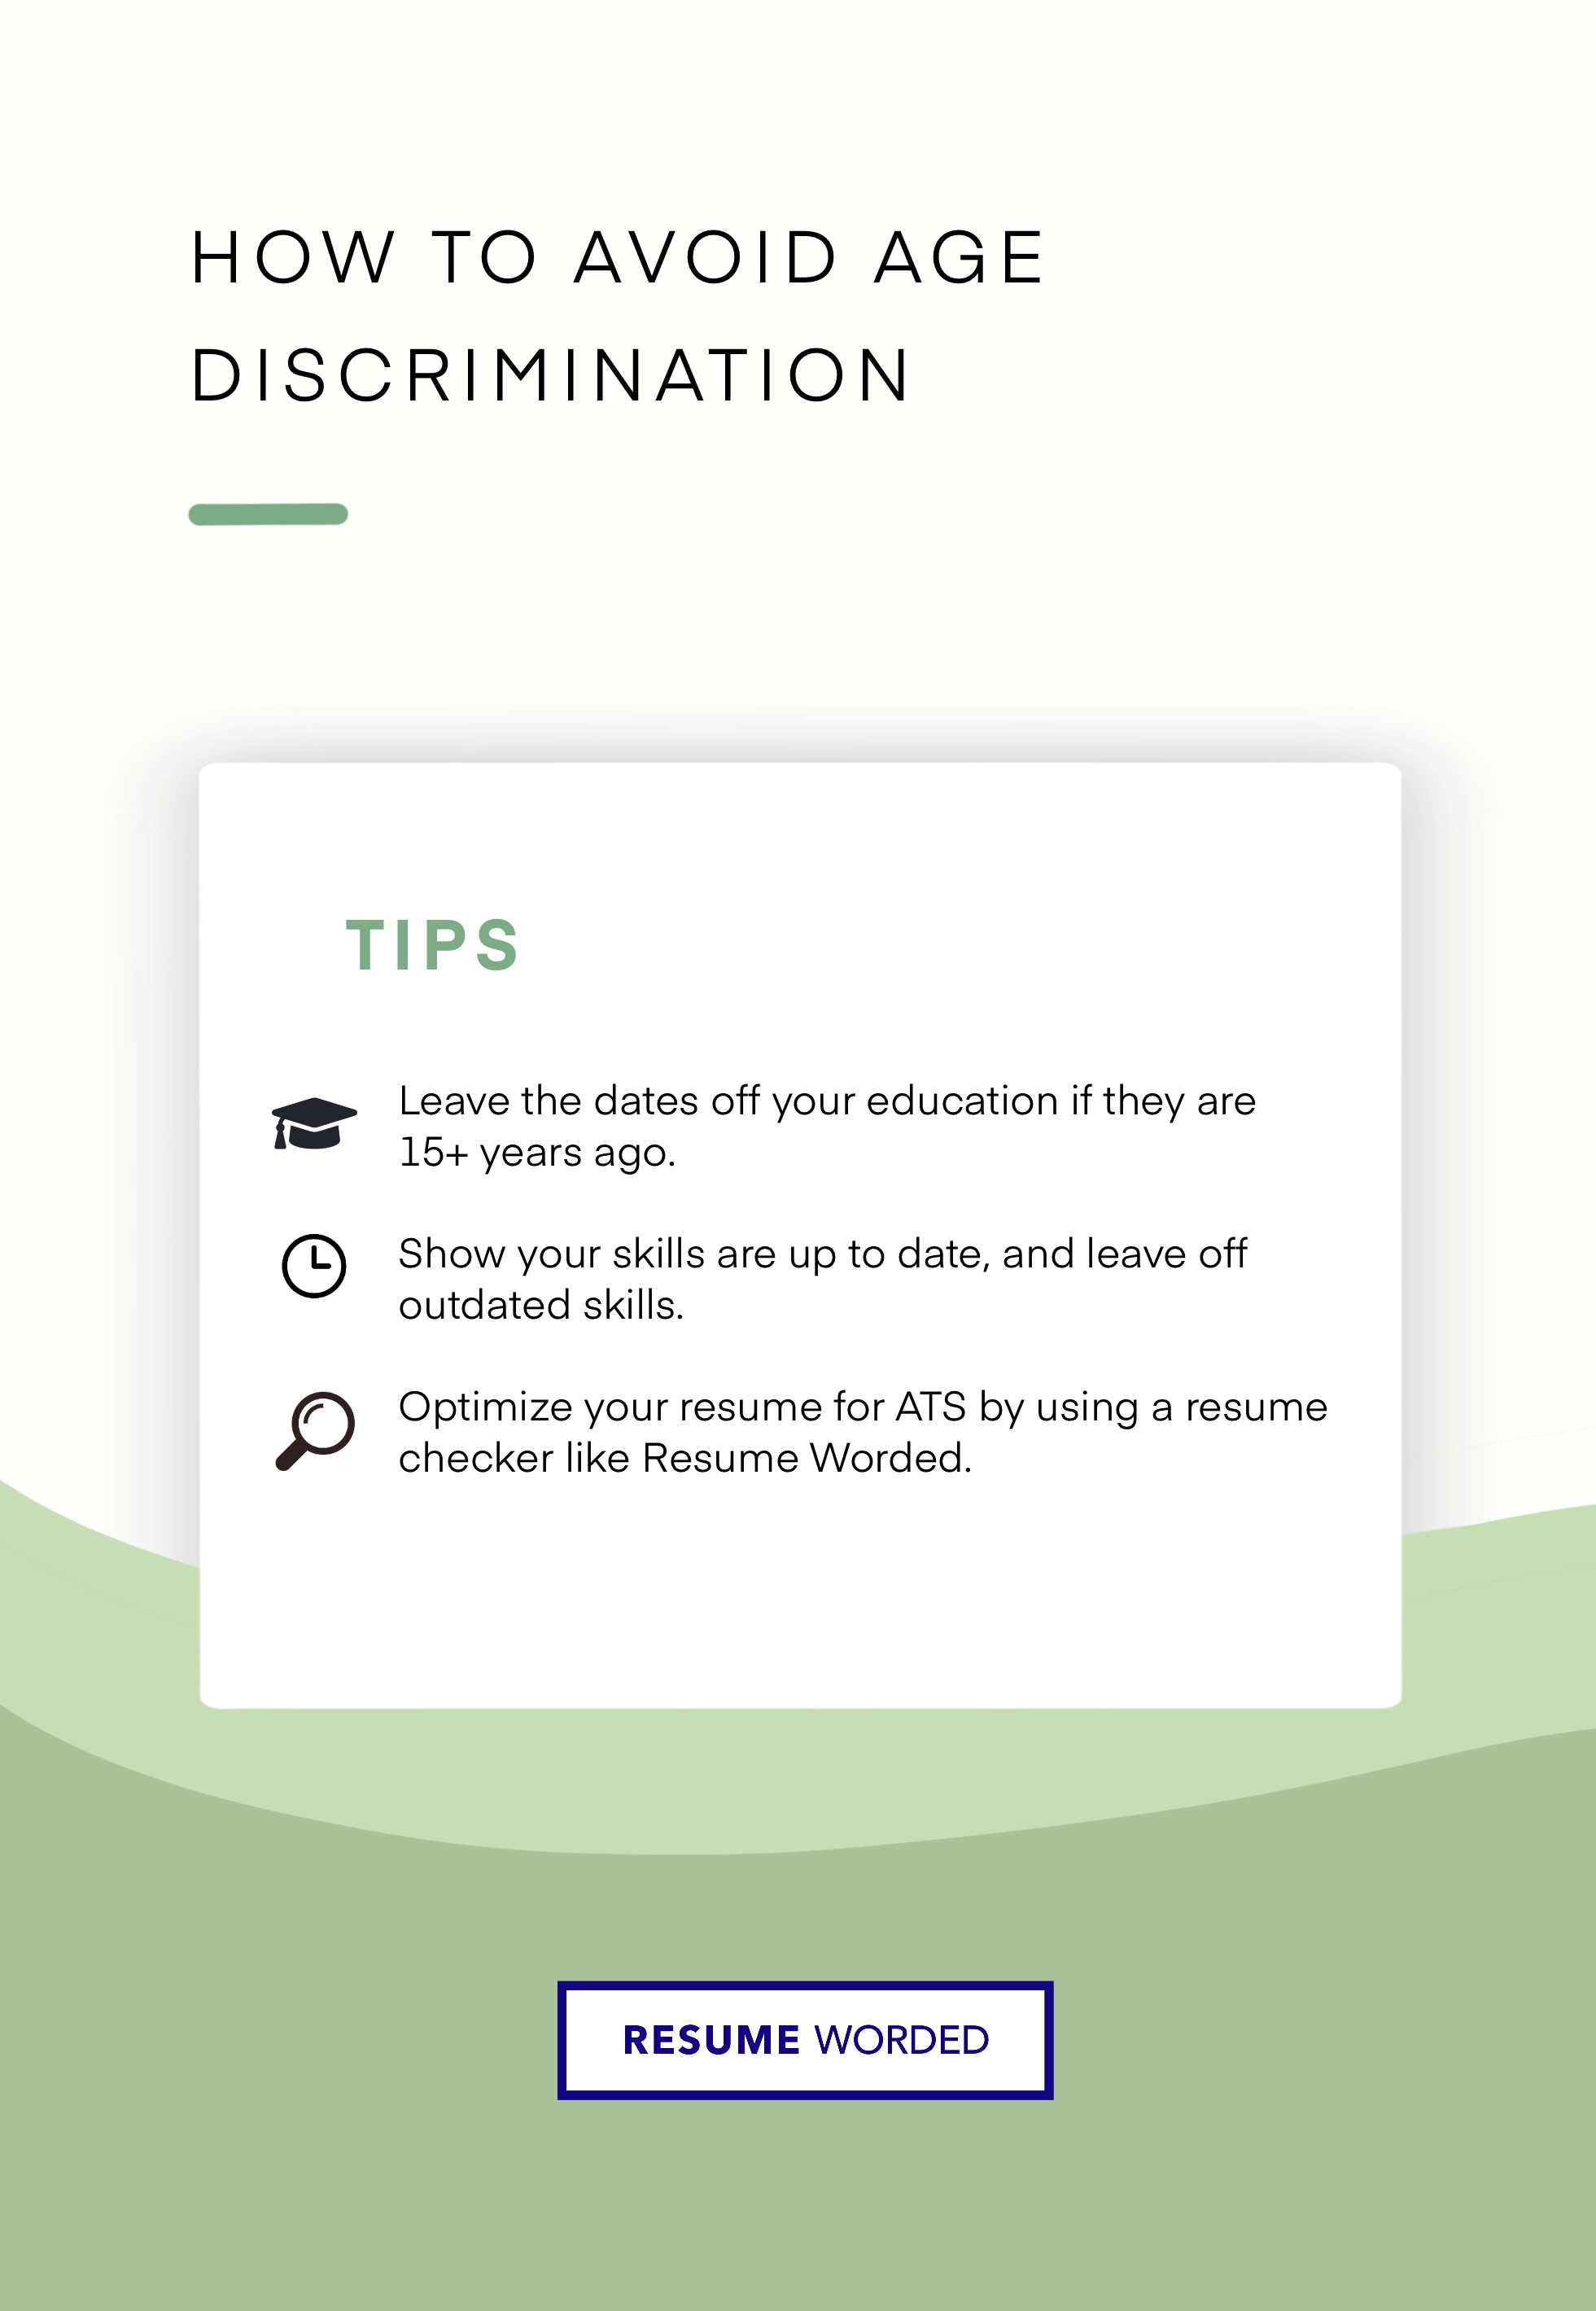 How to avoid age discrimination on a resume